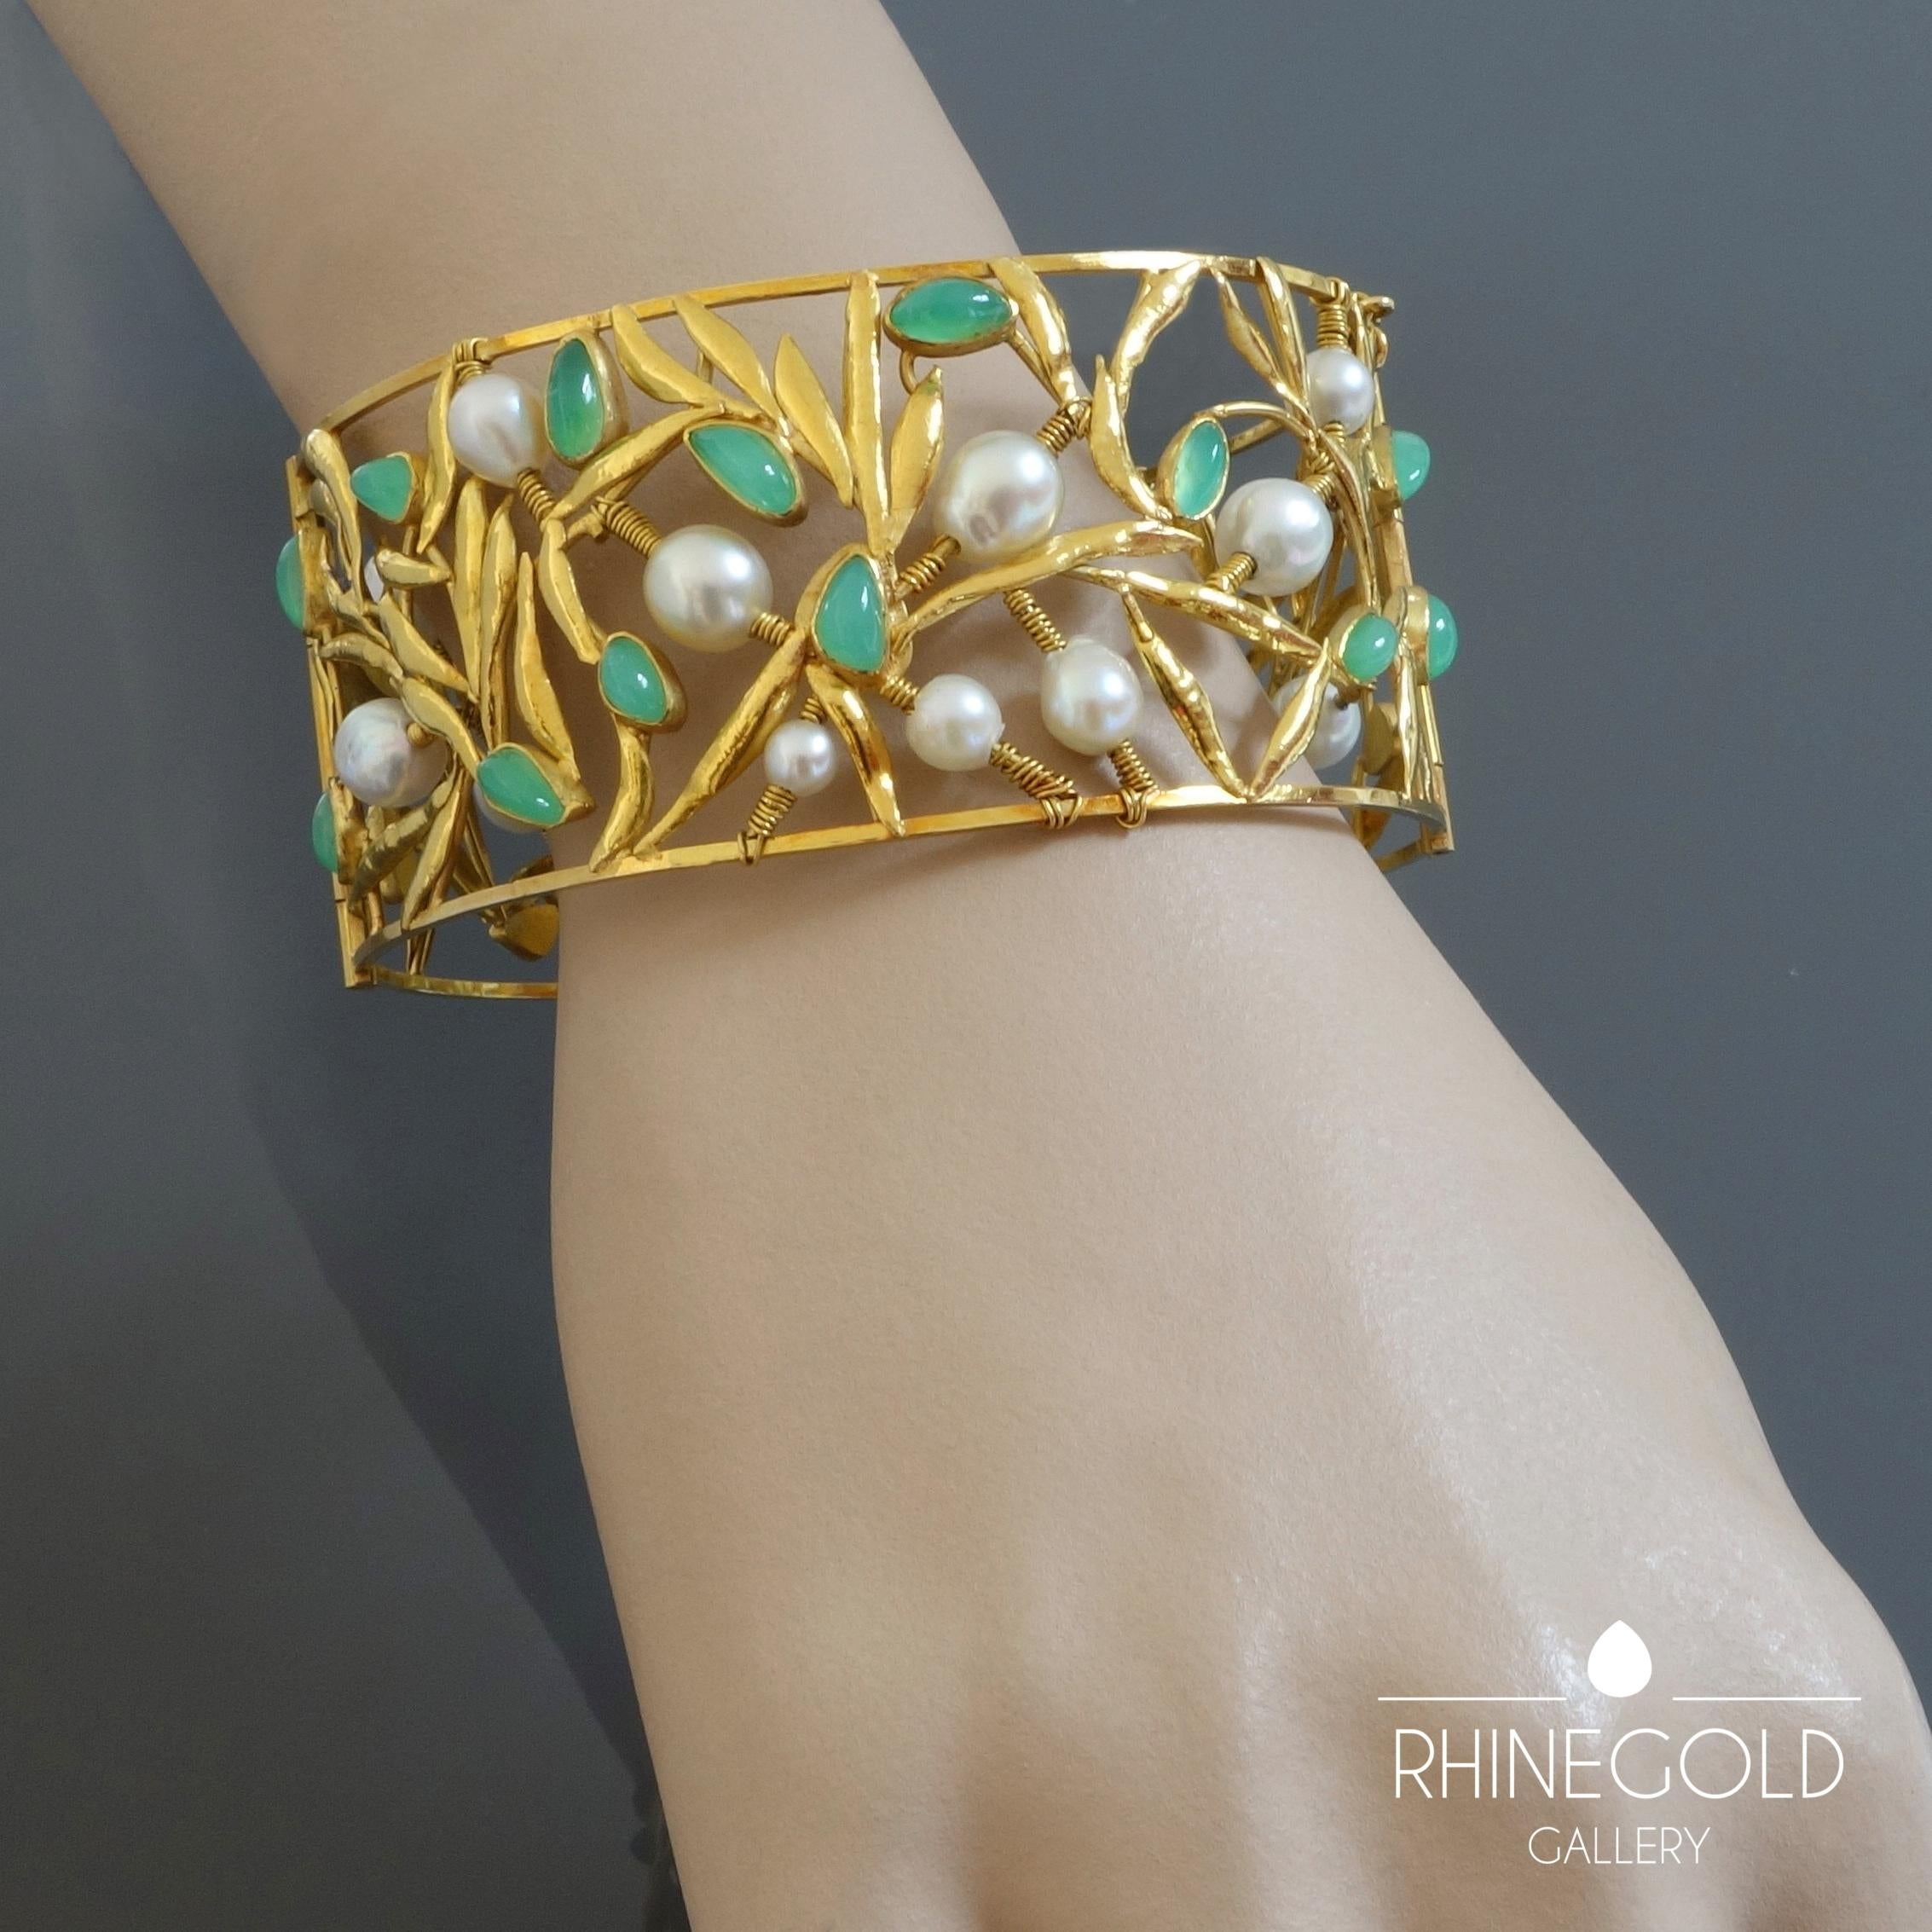 1970s Christel Dix Modernist Floral Chysoprase Pearl Gold Bangle 
18k yellow gold, chrysoprase, cultured pearls
Inner circumference 20.2 cm (approx. 7 15/16“), width 3.65 cm (approx. 1 7/16”)
Weight approx. 48.2 grams
Marks: maker’s mark, gold